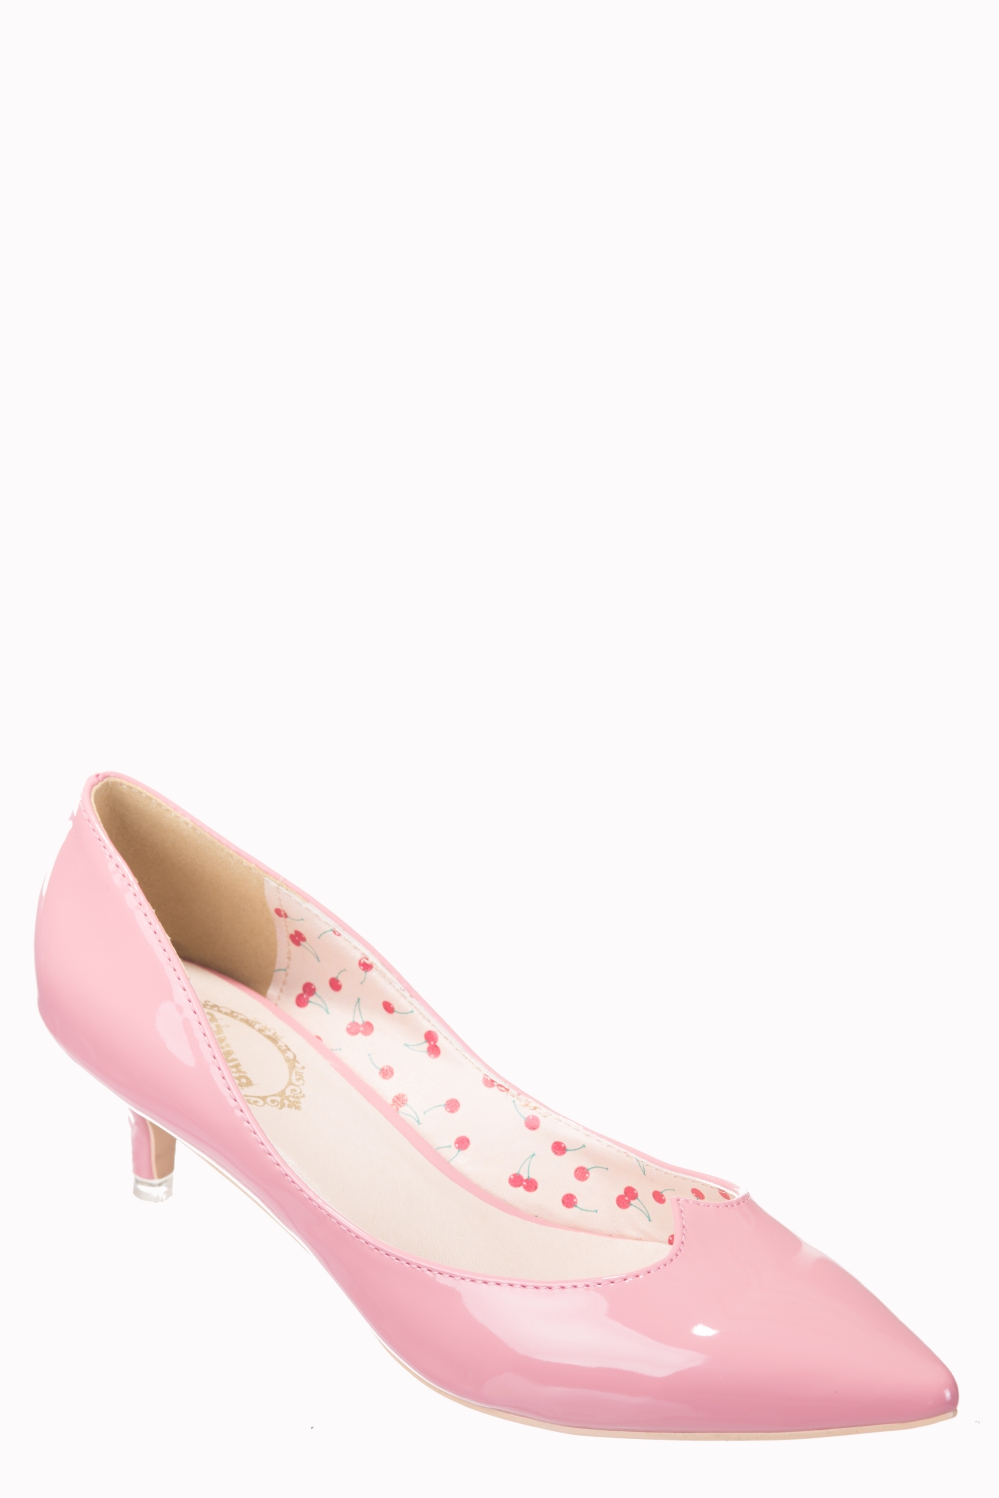 Dancing Days By Banned 1940s Pink Kitten Heels